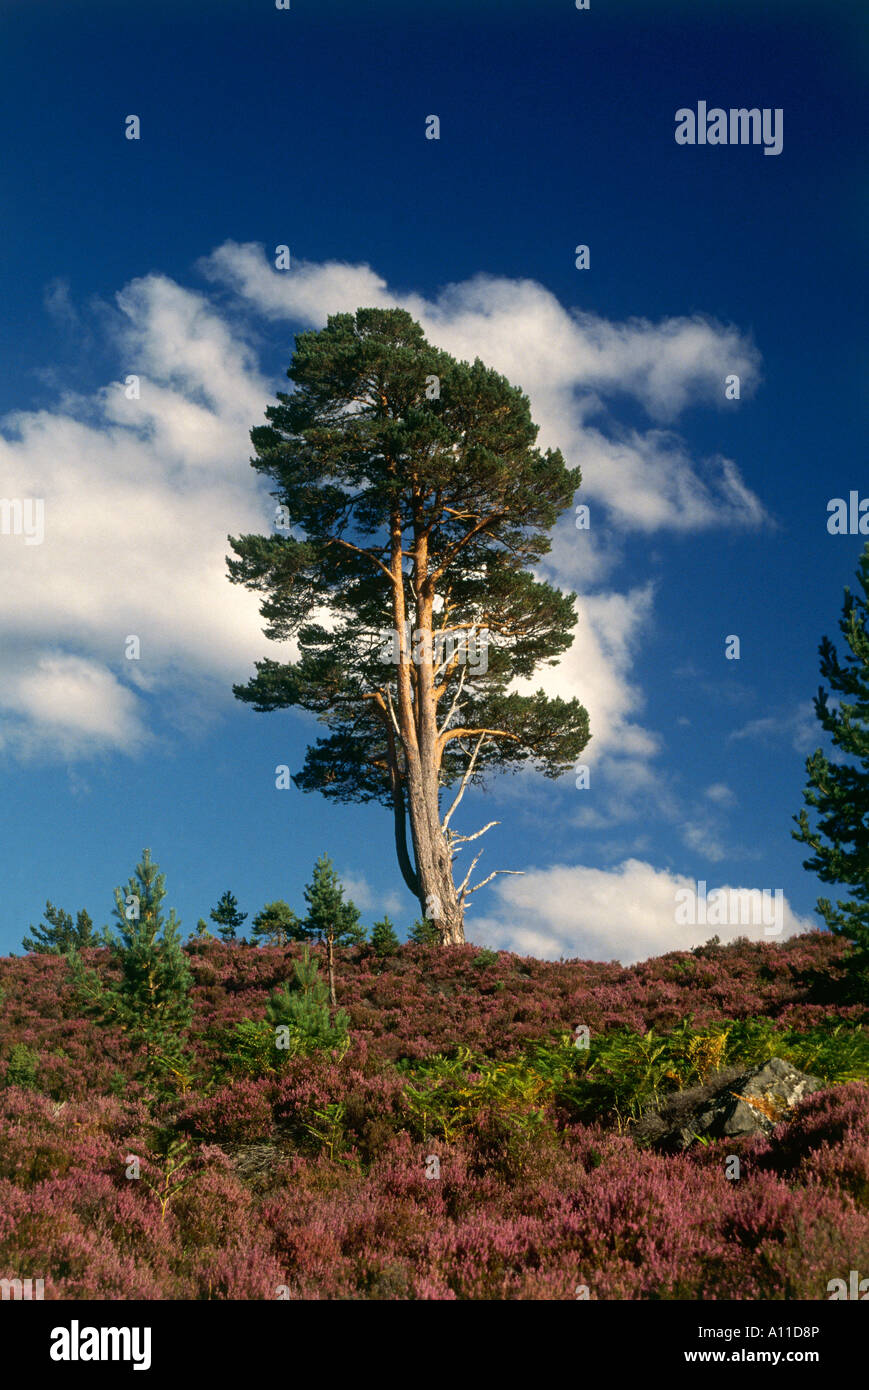 A pine tree stands alone surrounded by purple heather near Loch an Eilean Stock Photo